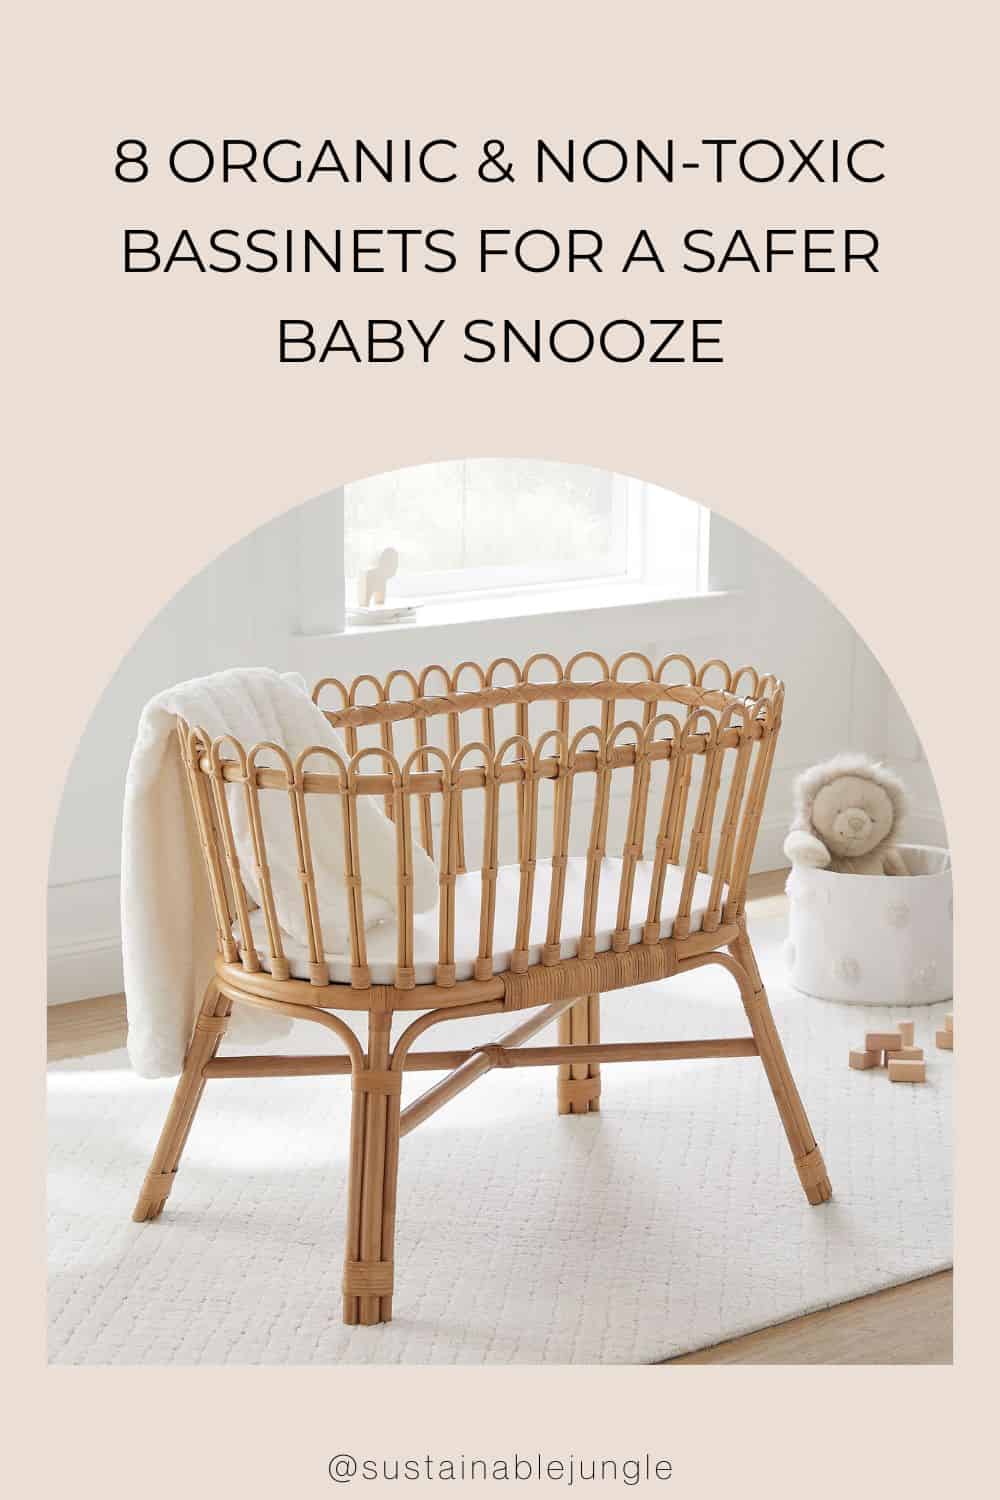 8 Organic & Non-Toxic Bassinets For A Safer Baby Snooze Image by Pottery Barn Kids #nontoxicbassinets #bassinetnontoxic #bestnontoxicbabybassinet #organicbassinets #organicbabybassinets #sustinablejungle